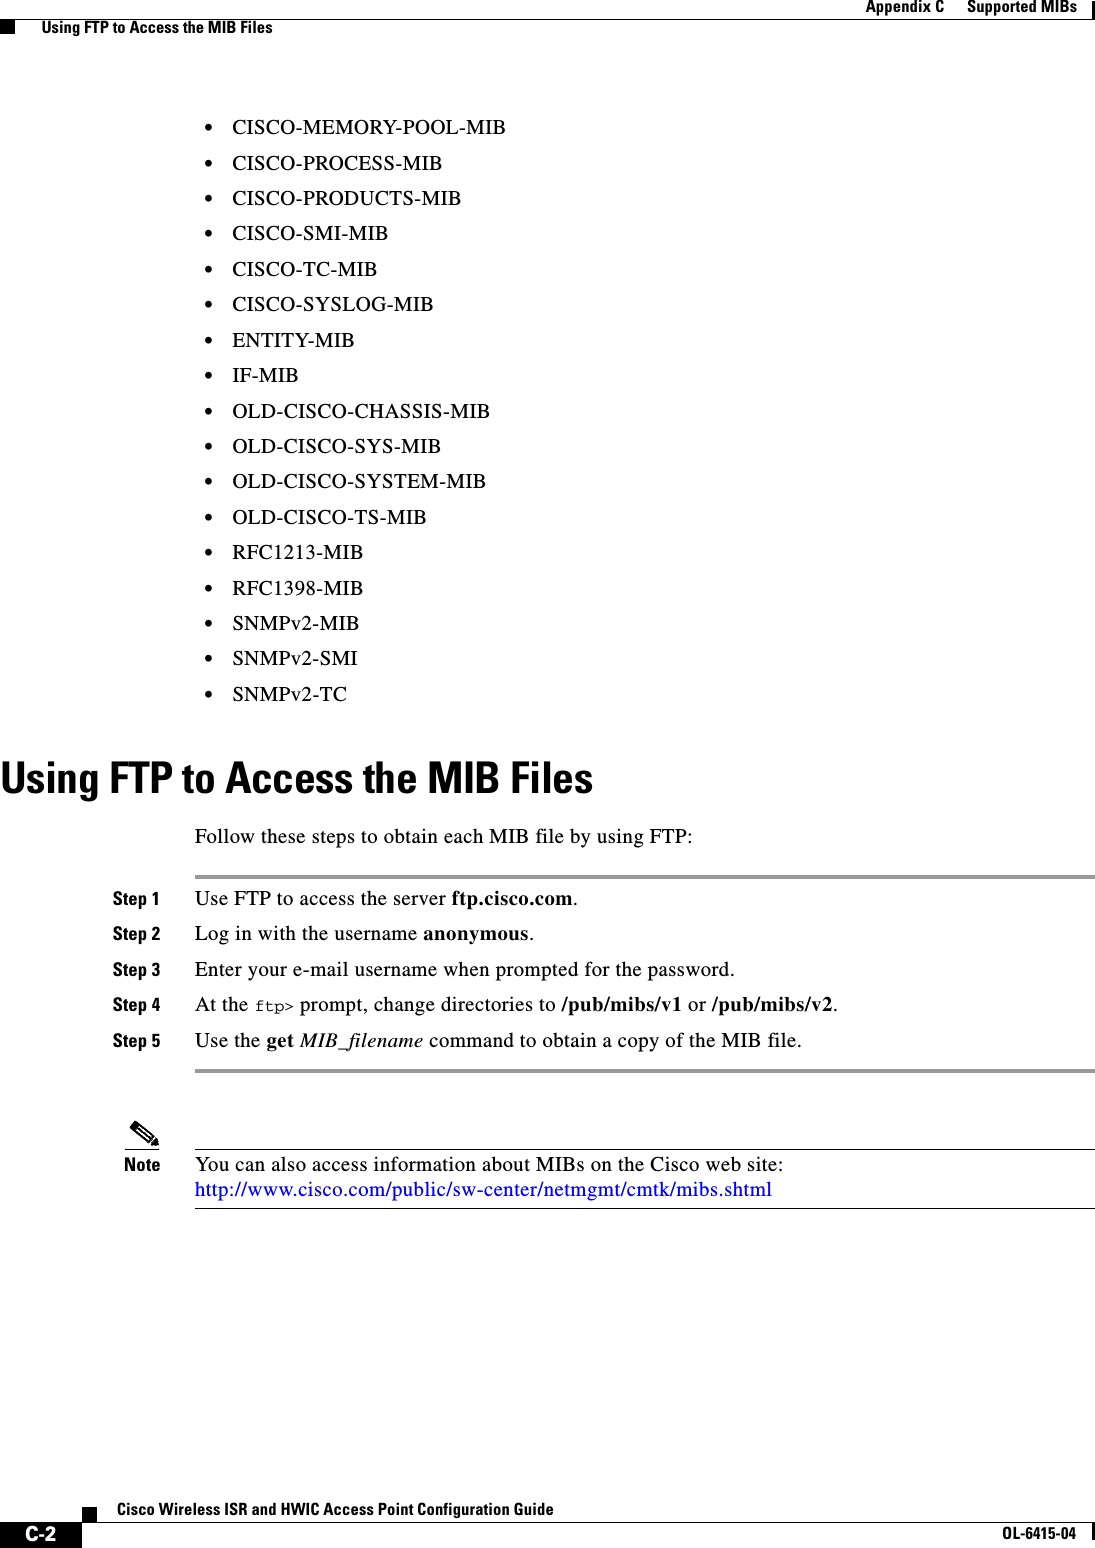  C-2Cisco Wireless ISR and HWIC Access Point Configuration GuideOL-6415-04Appendix C      Supported MIBs  Using FTP to Access the MIB Files  • CISCO-MEMORY-POOL-MIB  • CISCO-PROCESS-MIB  • CISCO-PRODUCTS-MIB  • CISCO-SMI-MIB  • CISCO-TC-MIB  • CISCO-SYSLOG-MIB  • ENTITY-MIB  • IF-MIB  • OLD-CISCO-CHASSIS-MIB  • OLD-CISCO-SYS-MIB  • OLD-CISCO-SYSTEM-MIB  • OLD-CISCO-TS-MIB  • RFC1213-MIB  • RFC1398-MIB   • SNMPv2-MIB  • SNMPv2-SMI  • SNMPv2-TCUsing FTP to Access the MIB FilesFollow these steps to obtain each MIB file by using FTP:Step 1 Use FTP to access the server ftp.cisco.com.Step 2 Log in with the username anonymous.Step 3 Enter your e-mail username when prompted for the password.Step 4 At the ftp&gt; prompt, change directories to /pub/mibs/v1 or /pub/mibs/v2.Step 5 Use the get MIB_filename command to obtain a copy of the MIB file.Note You can also access information about MIBs on the Cisco web site: http://www.cisco.com/public/sw-center/netmgmt/cmtk/mibs.shtml